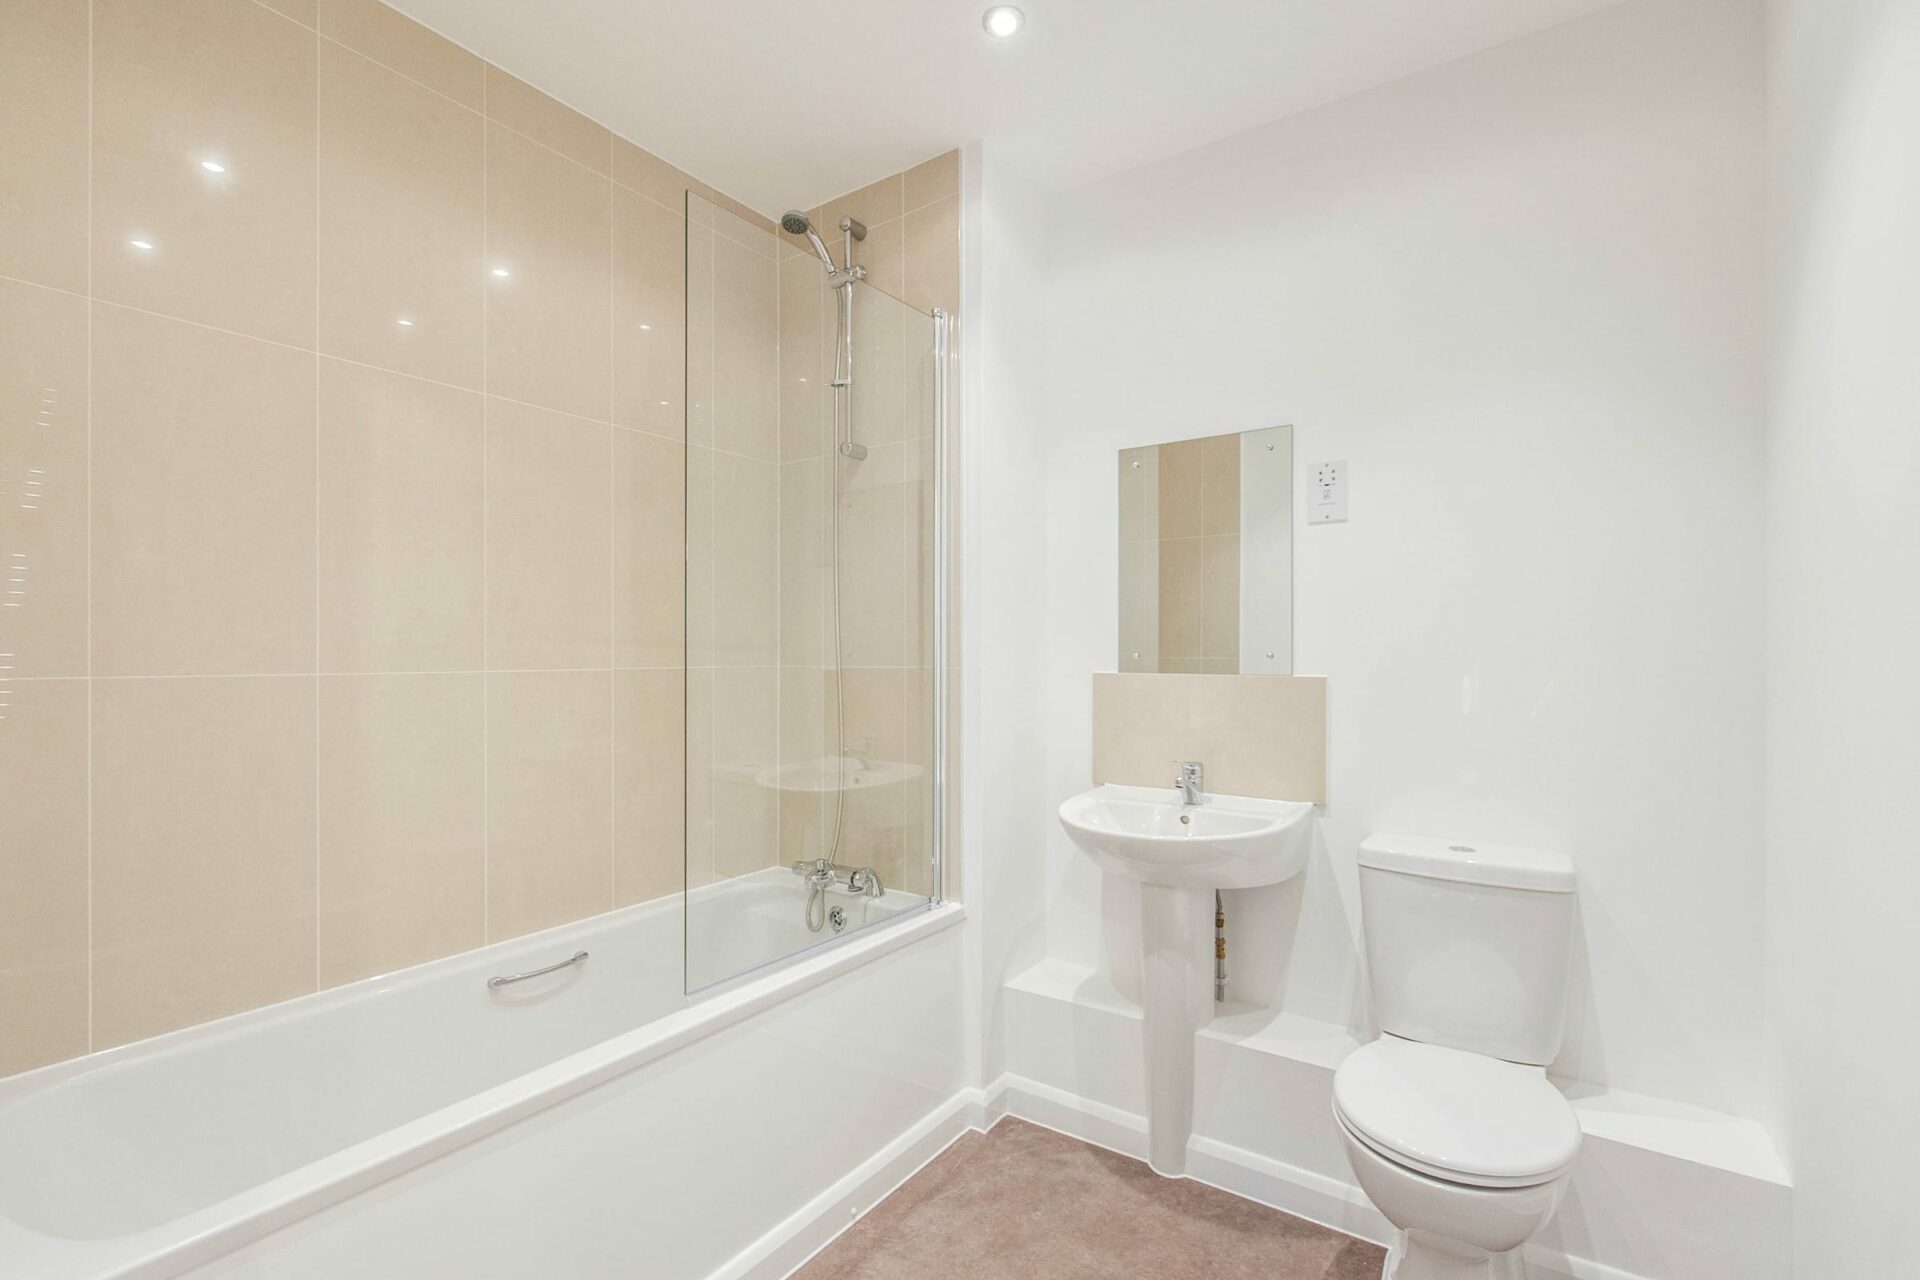 Photo of a CGI bathroom that represents a similar style to the specifications at Eaton Leys Buckinghamshire